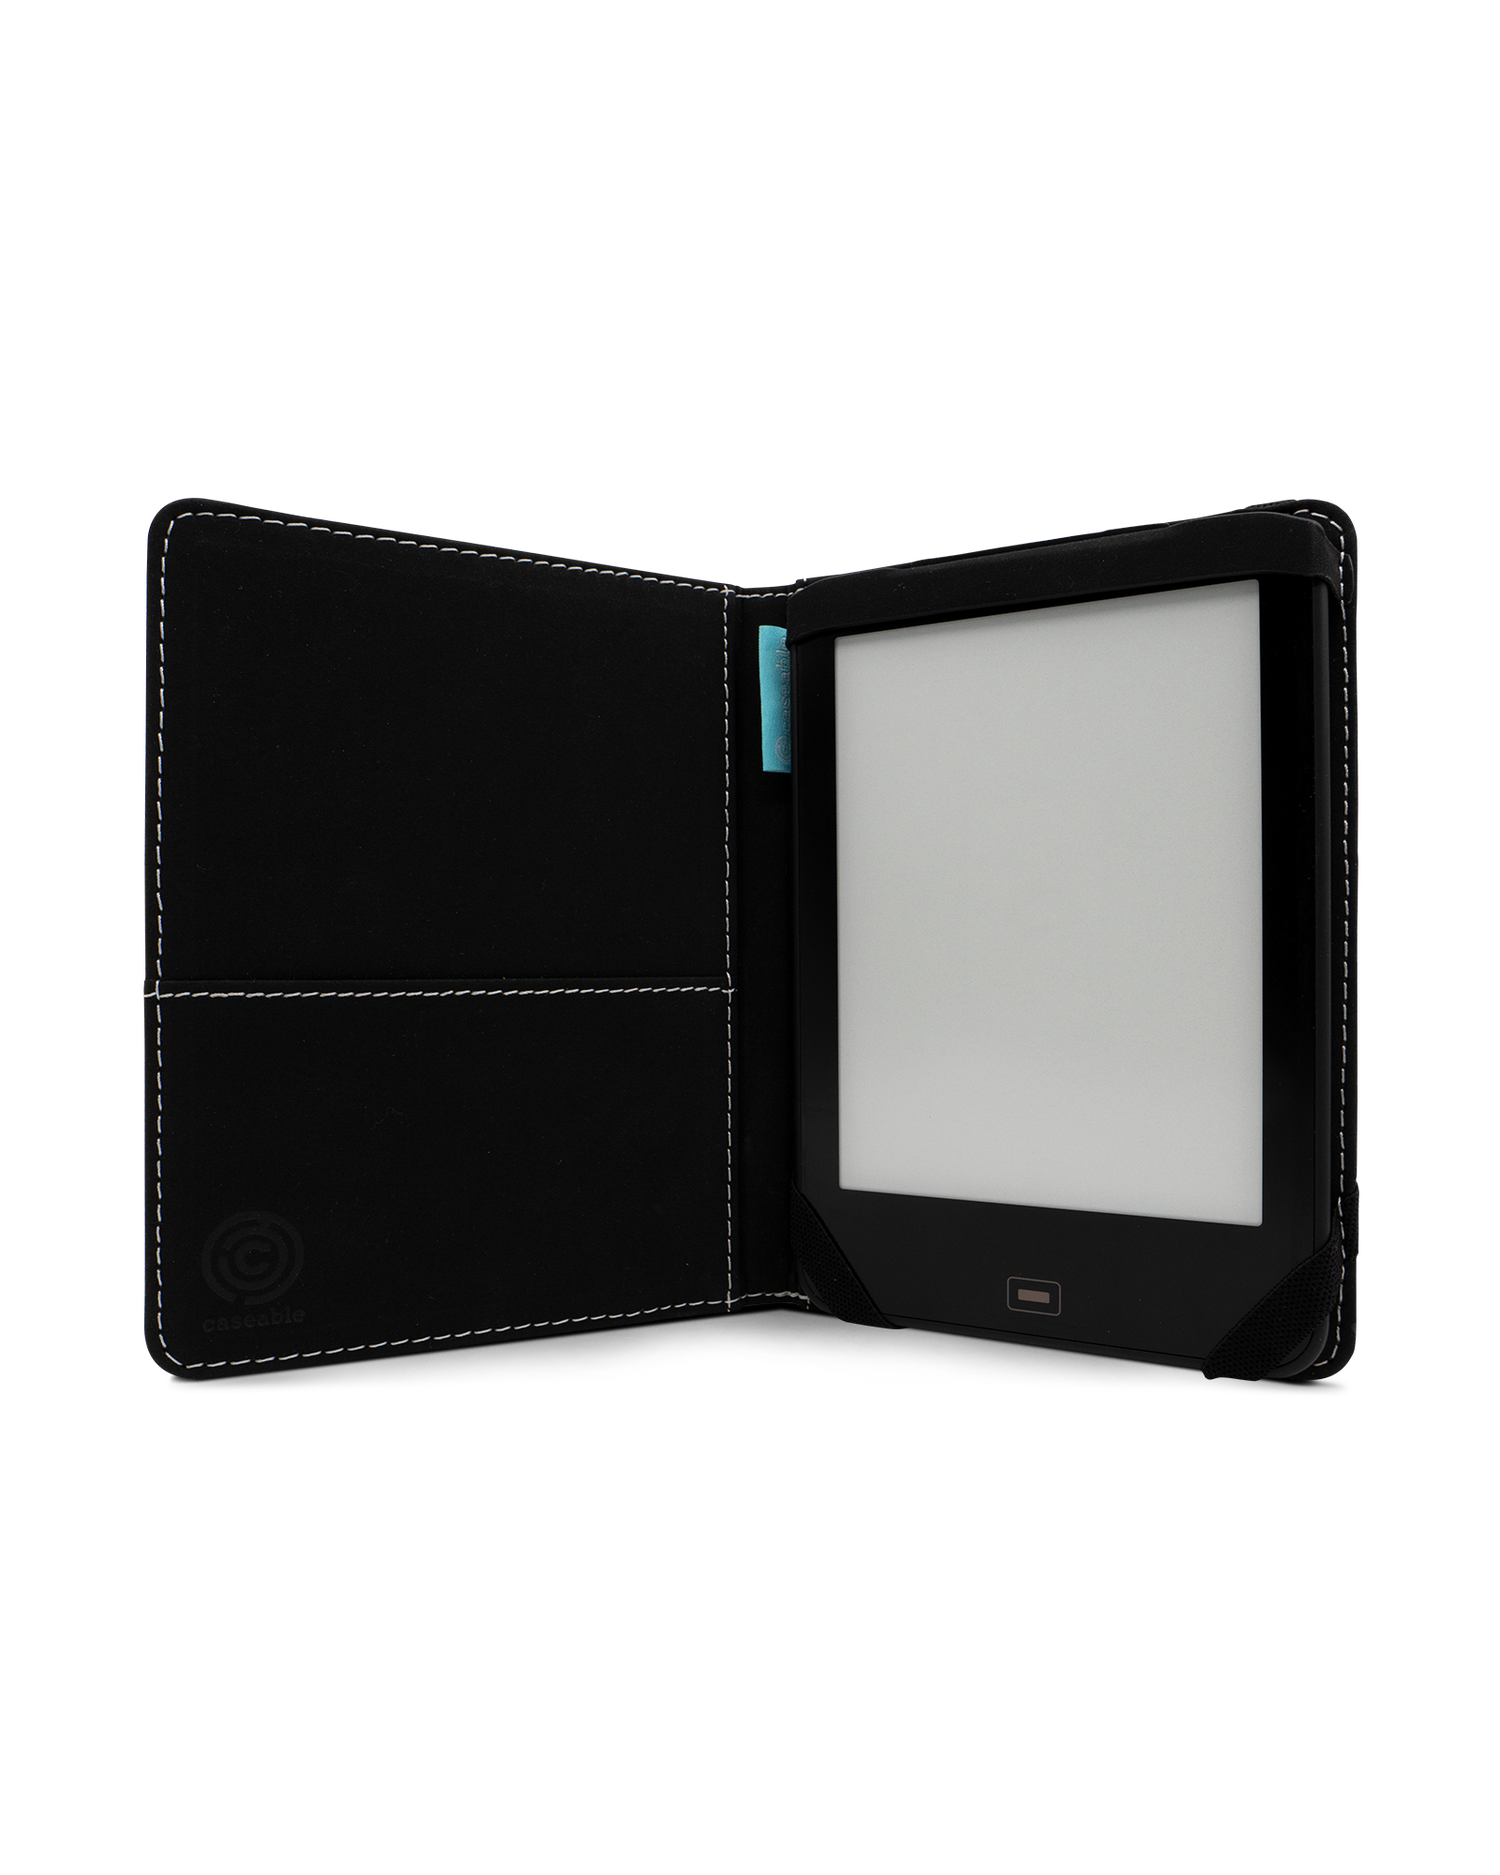 Have A Day eReader Case for tolino vision 1 to 4 HD: Opened interior view